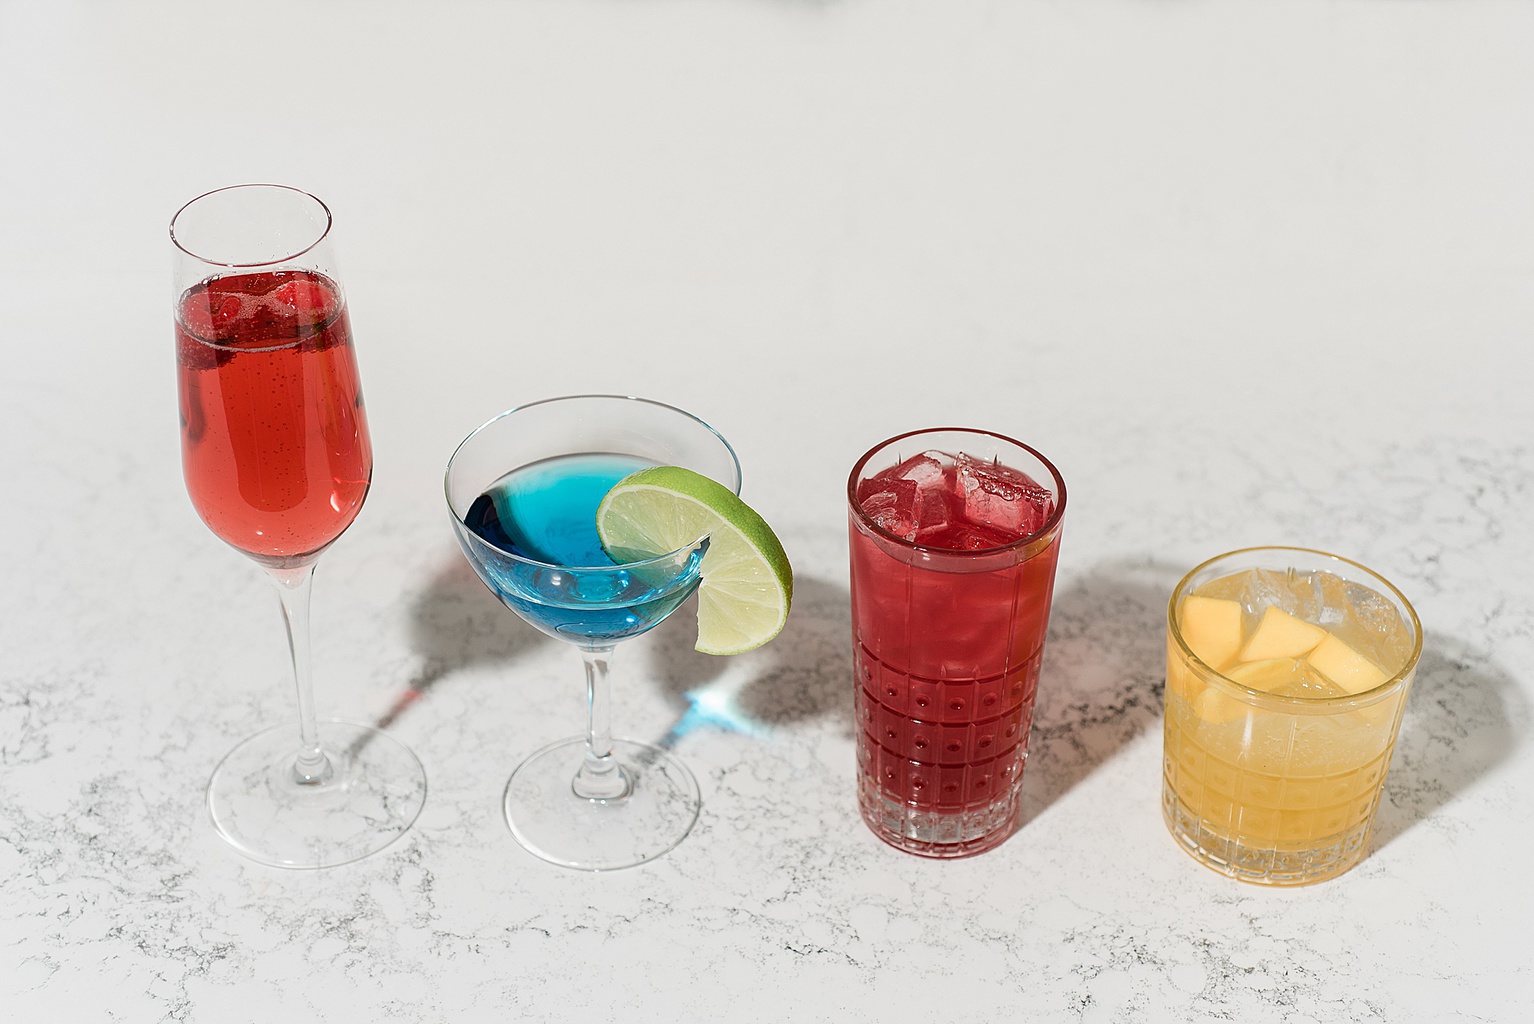 East Lansing's Graduate Hotel School Spirits Dinner, photo of mixed drinks lined up on a marble surface, by Allie Siarto & Co. Photography, Lansing commercial photographer